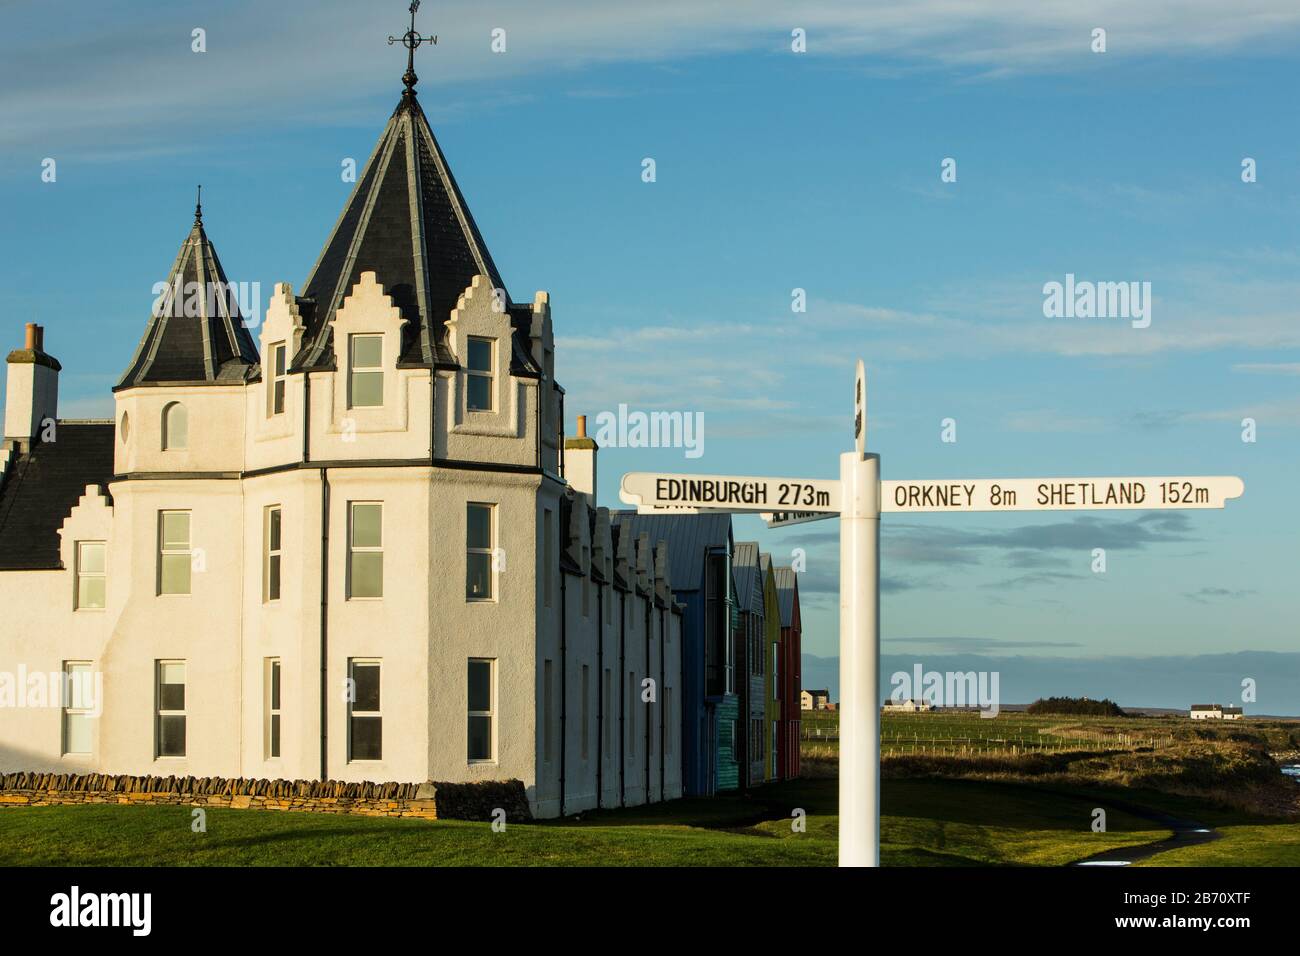 The famous John O'Groats Hotel, with the end of Britain sign, now The Inn at John O'Groats, John O'Groats, Caithness, Scotland, UK Stock Photo